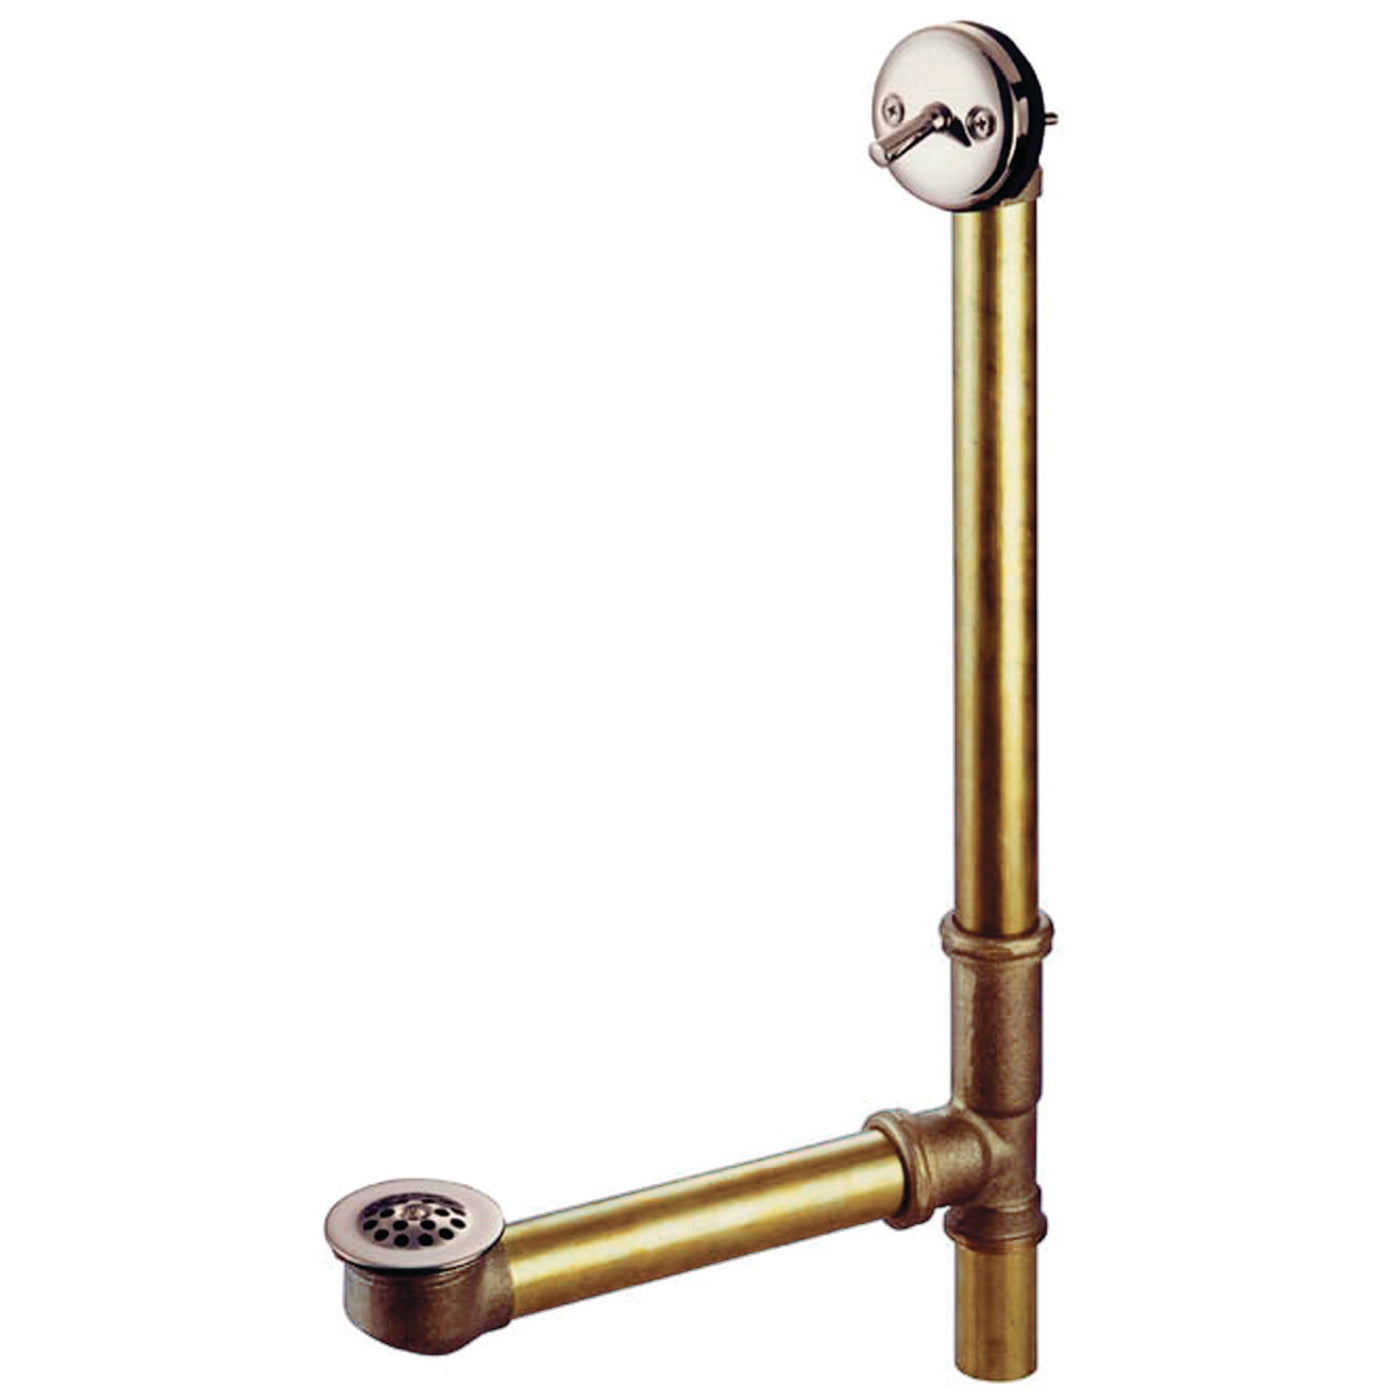 Elements of Design EDTL1168 21-Inch Trip Lever Waste and Overflow with Grid, Brushed Nickel